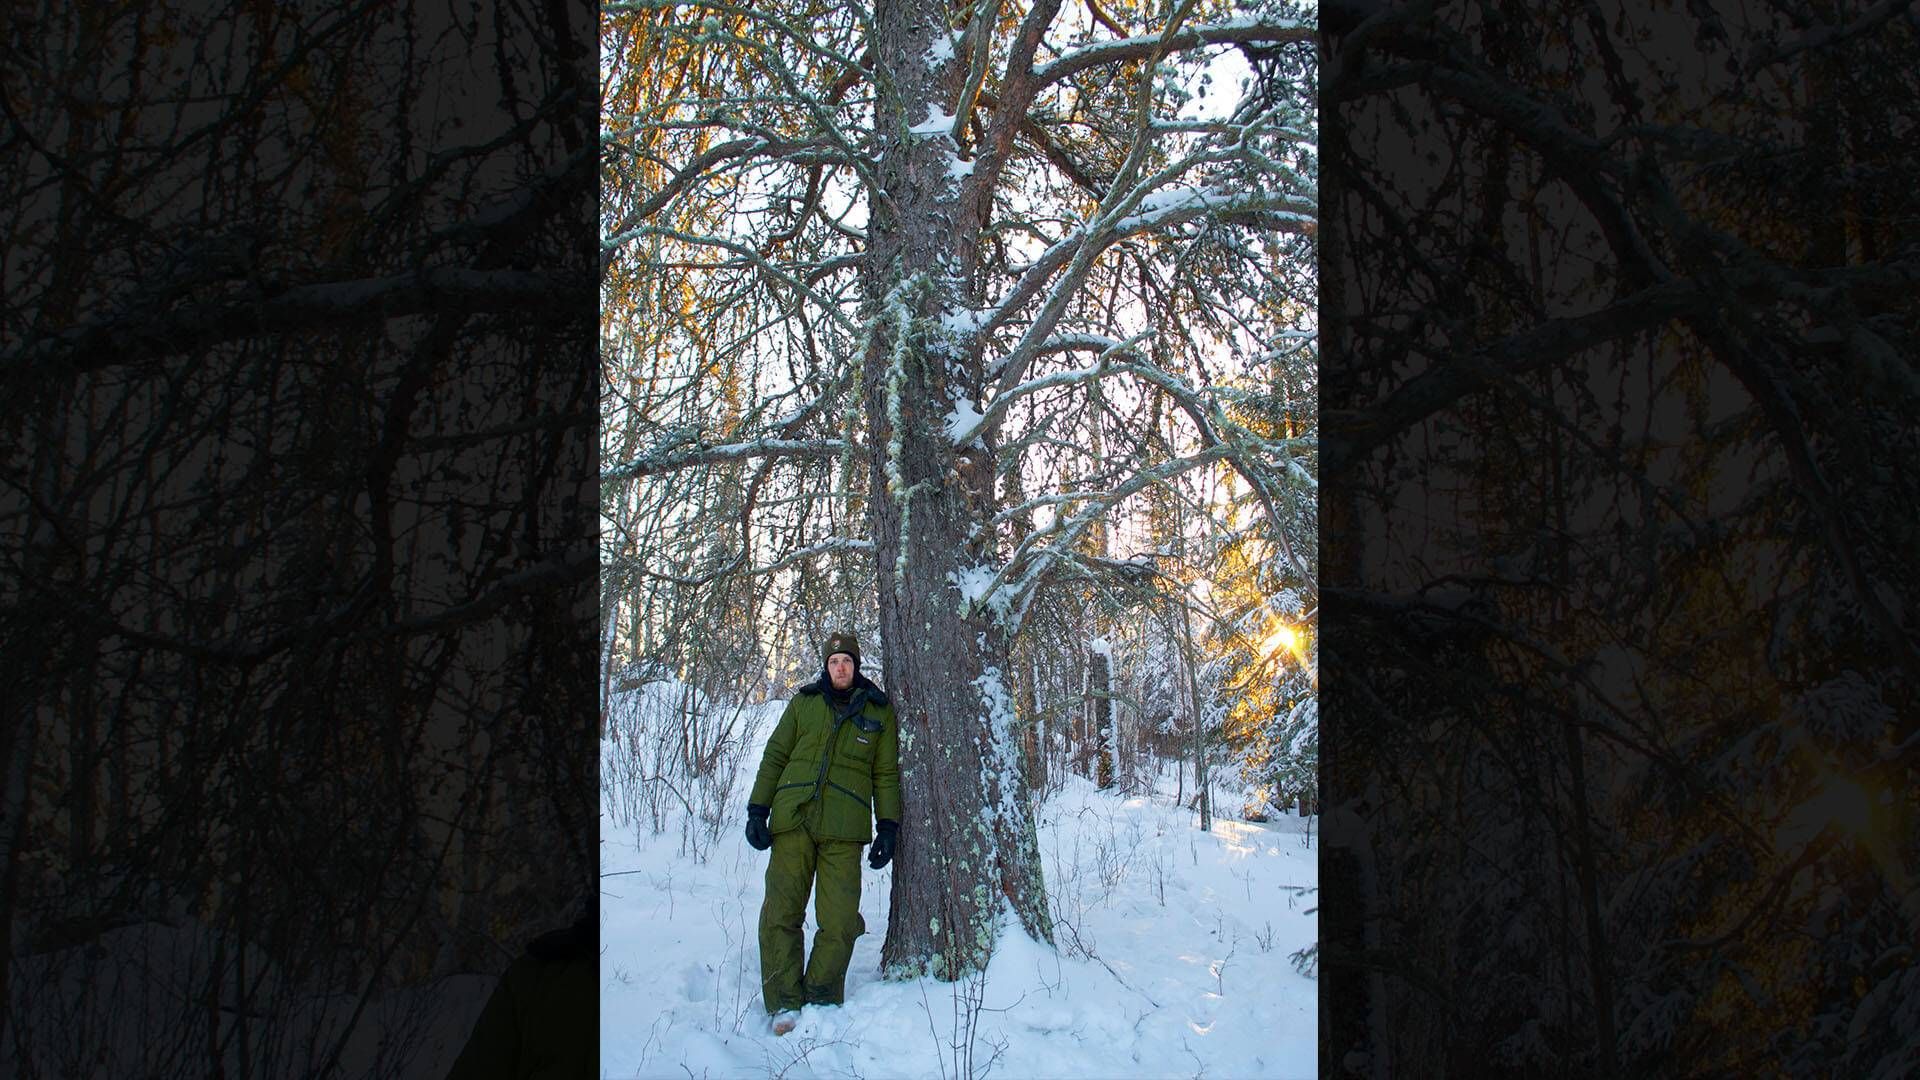 National Champion Jack Pine, located by Austin Homkes (pictured) near Voyageurs National Park